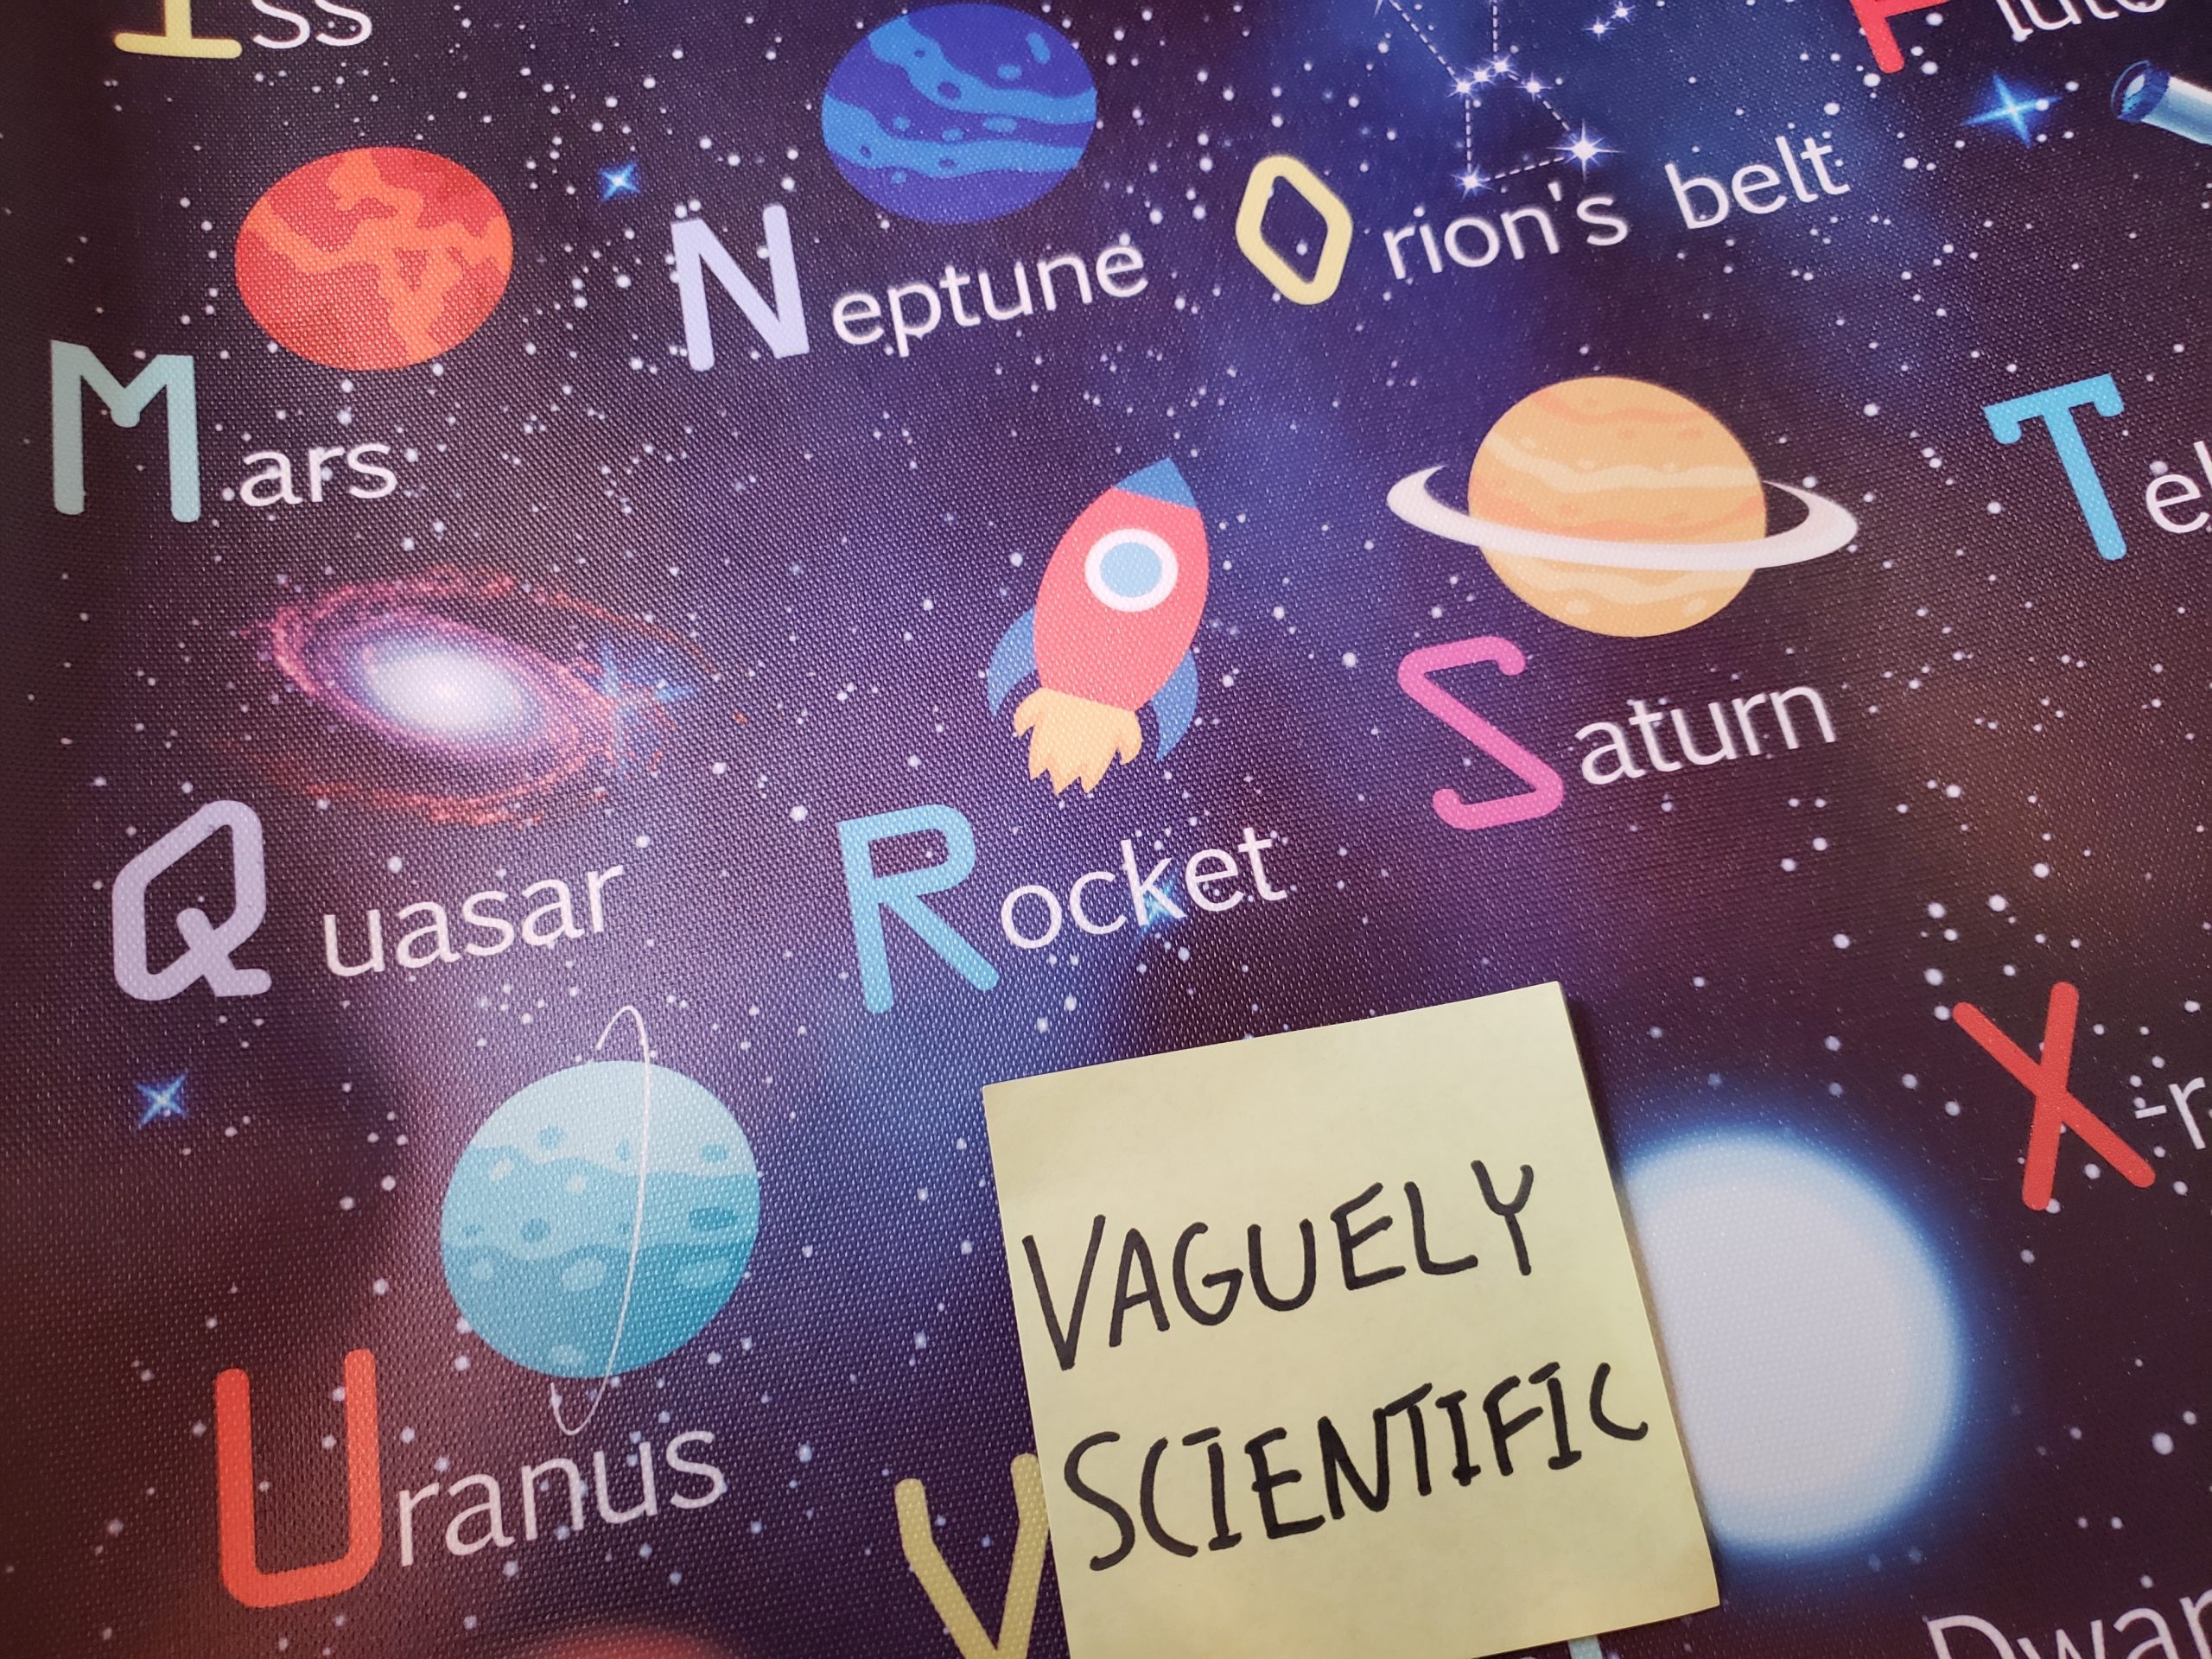 A space-themed alphabet, with V being for Vaguely Scientific.